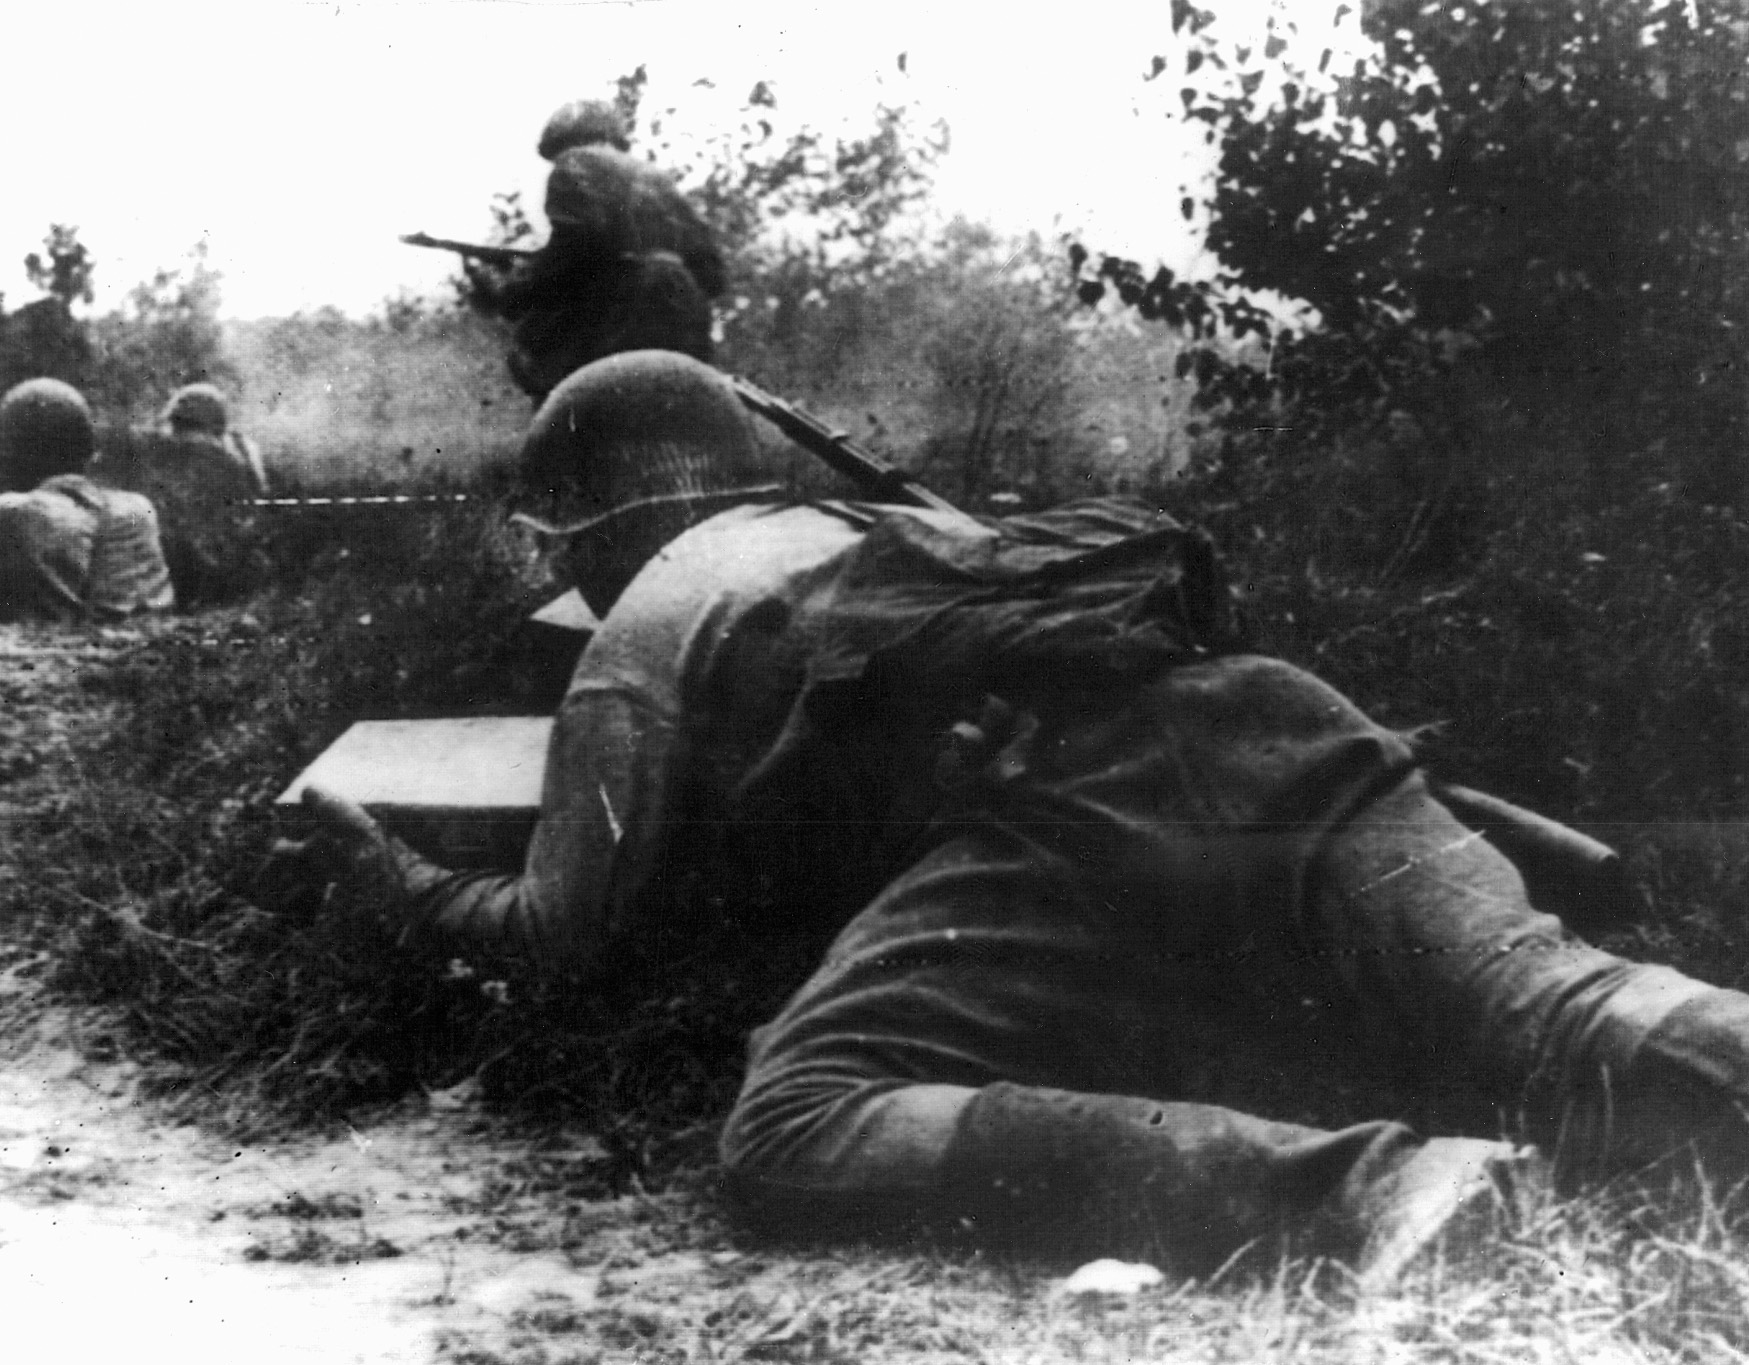 On August 12, 1942, a Red Army soldier crawls forward to deliver ammunition to comrades fighting to hold back a German counterattack on Soviet positions. 